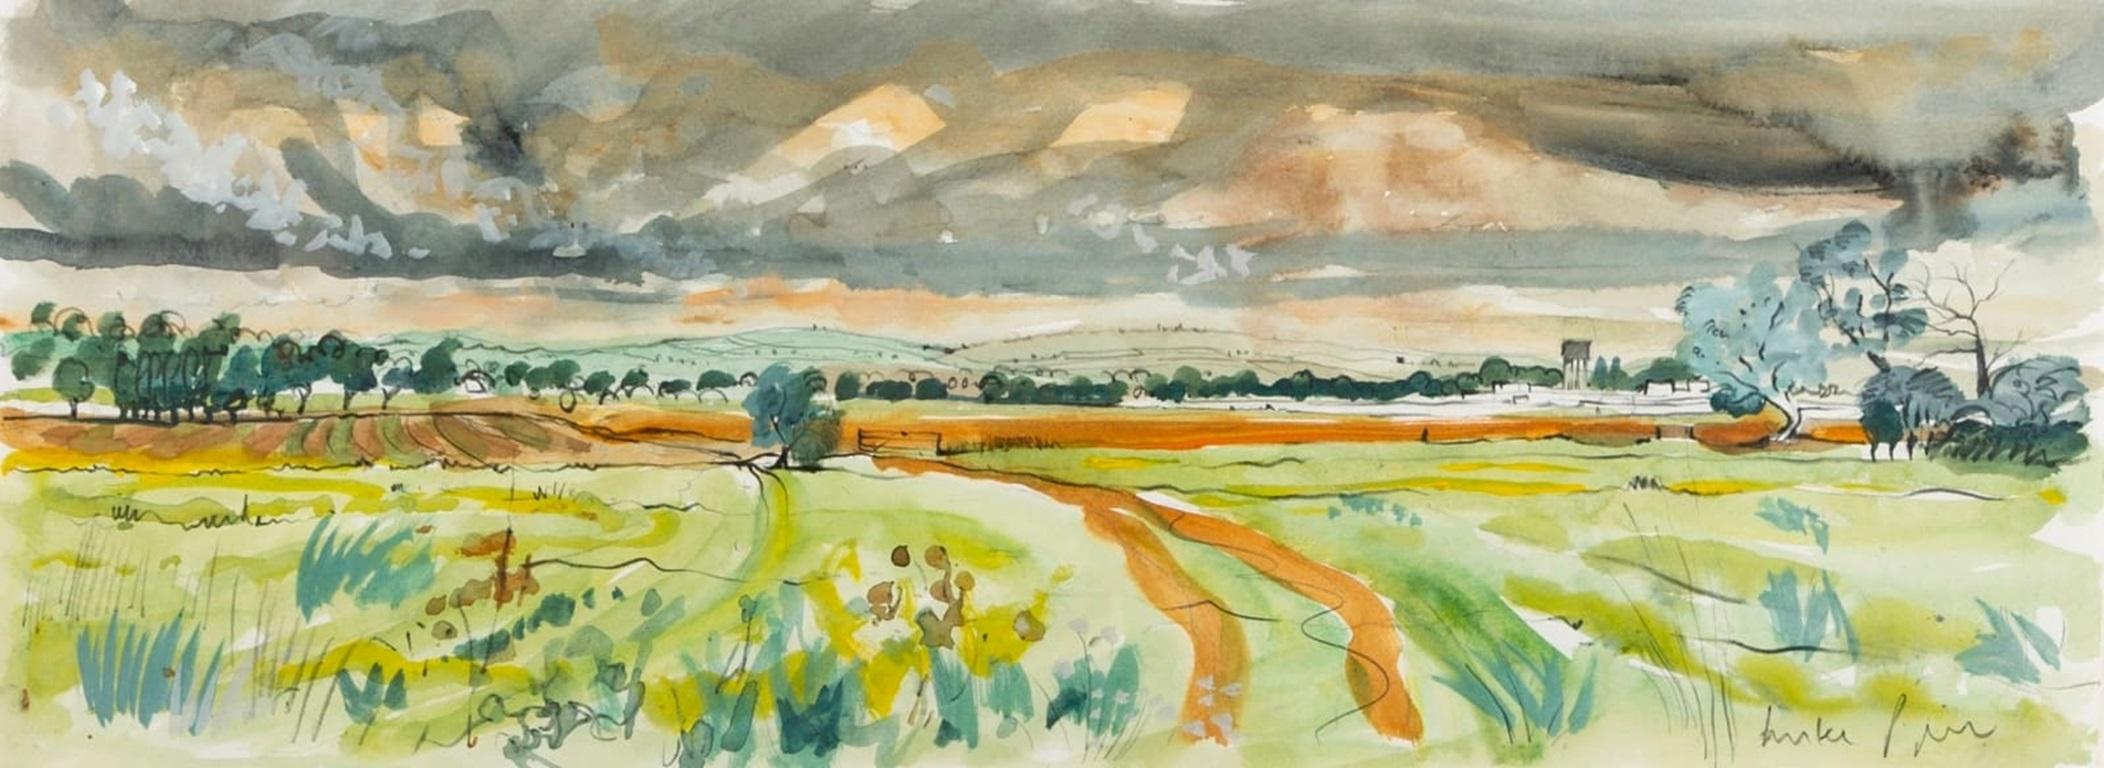 View South from Sharpham Common, Near Glastonbury Painting by Luke Piper, 2020